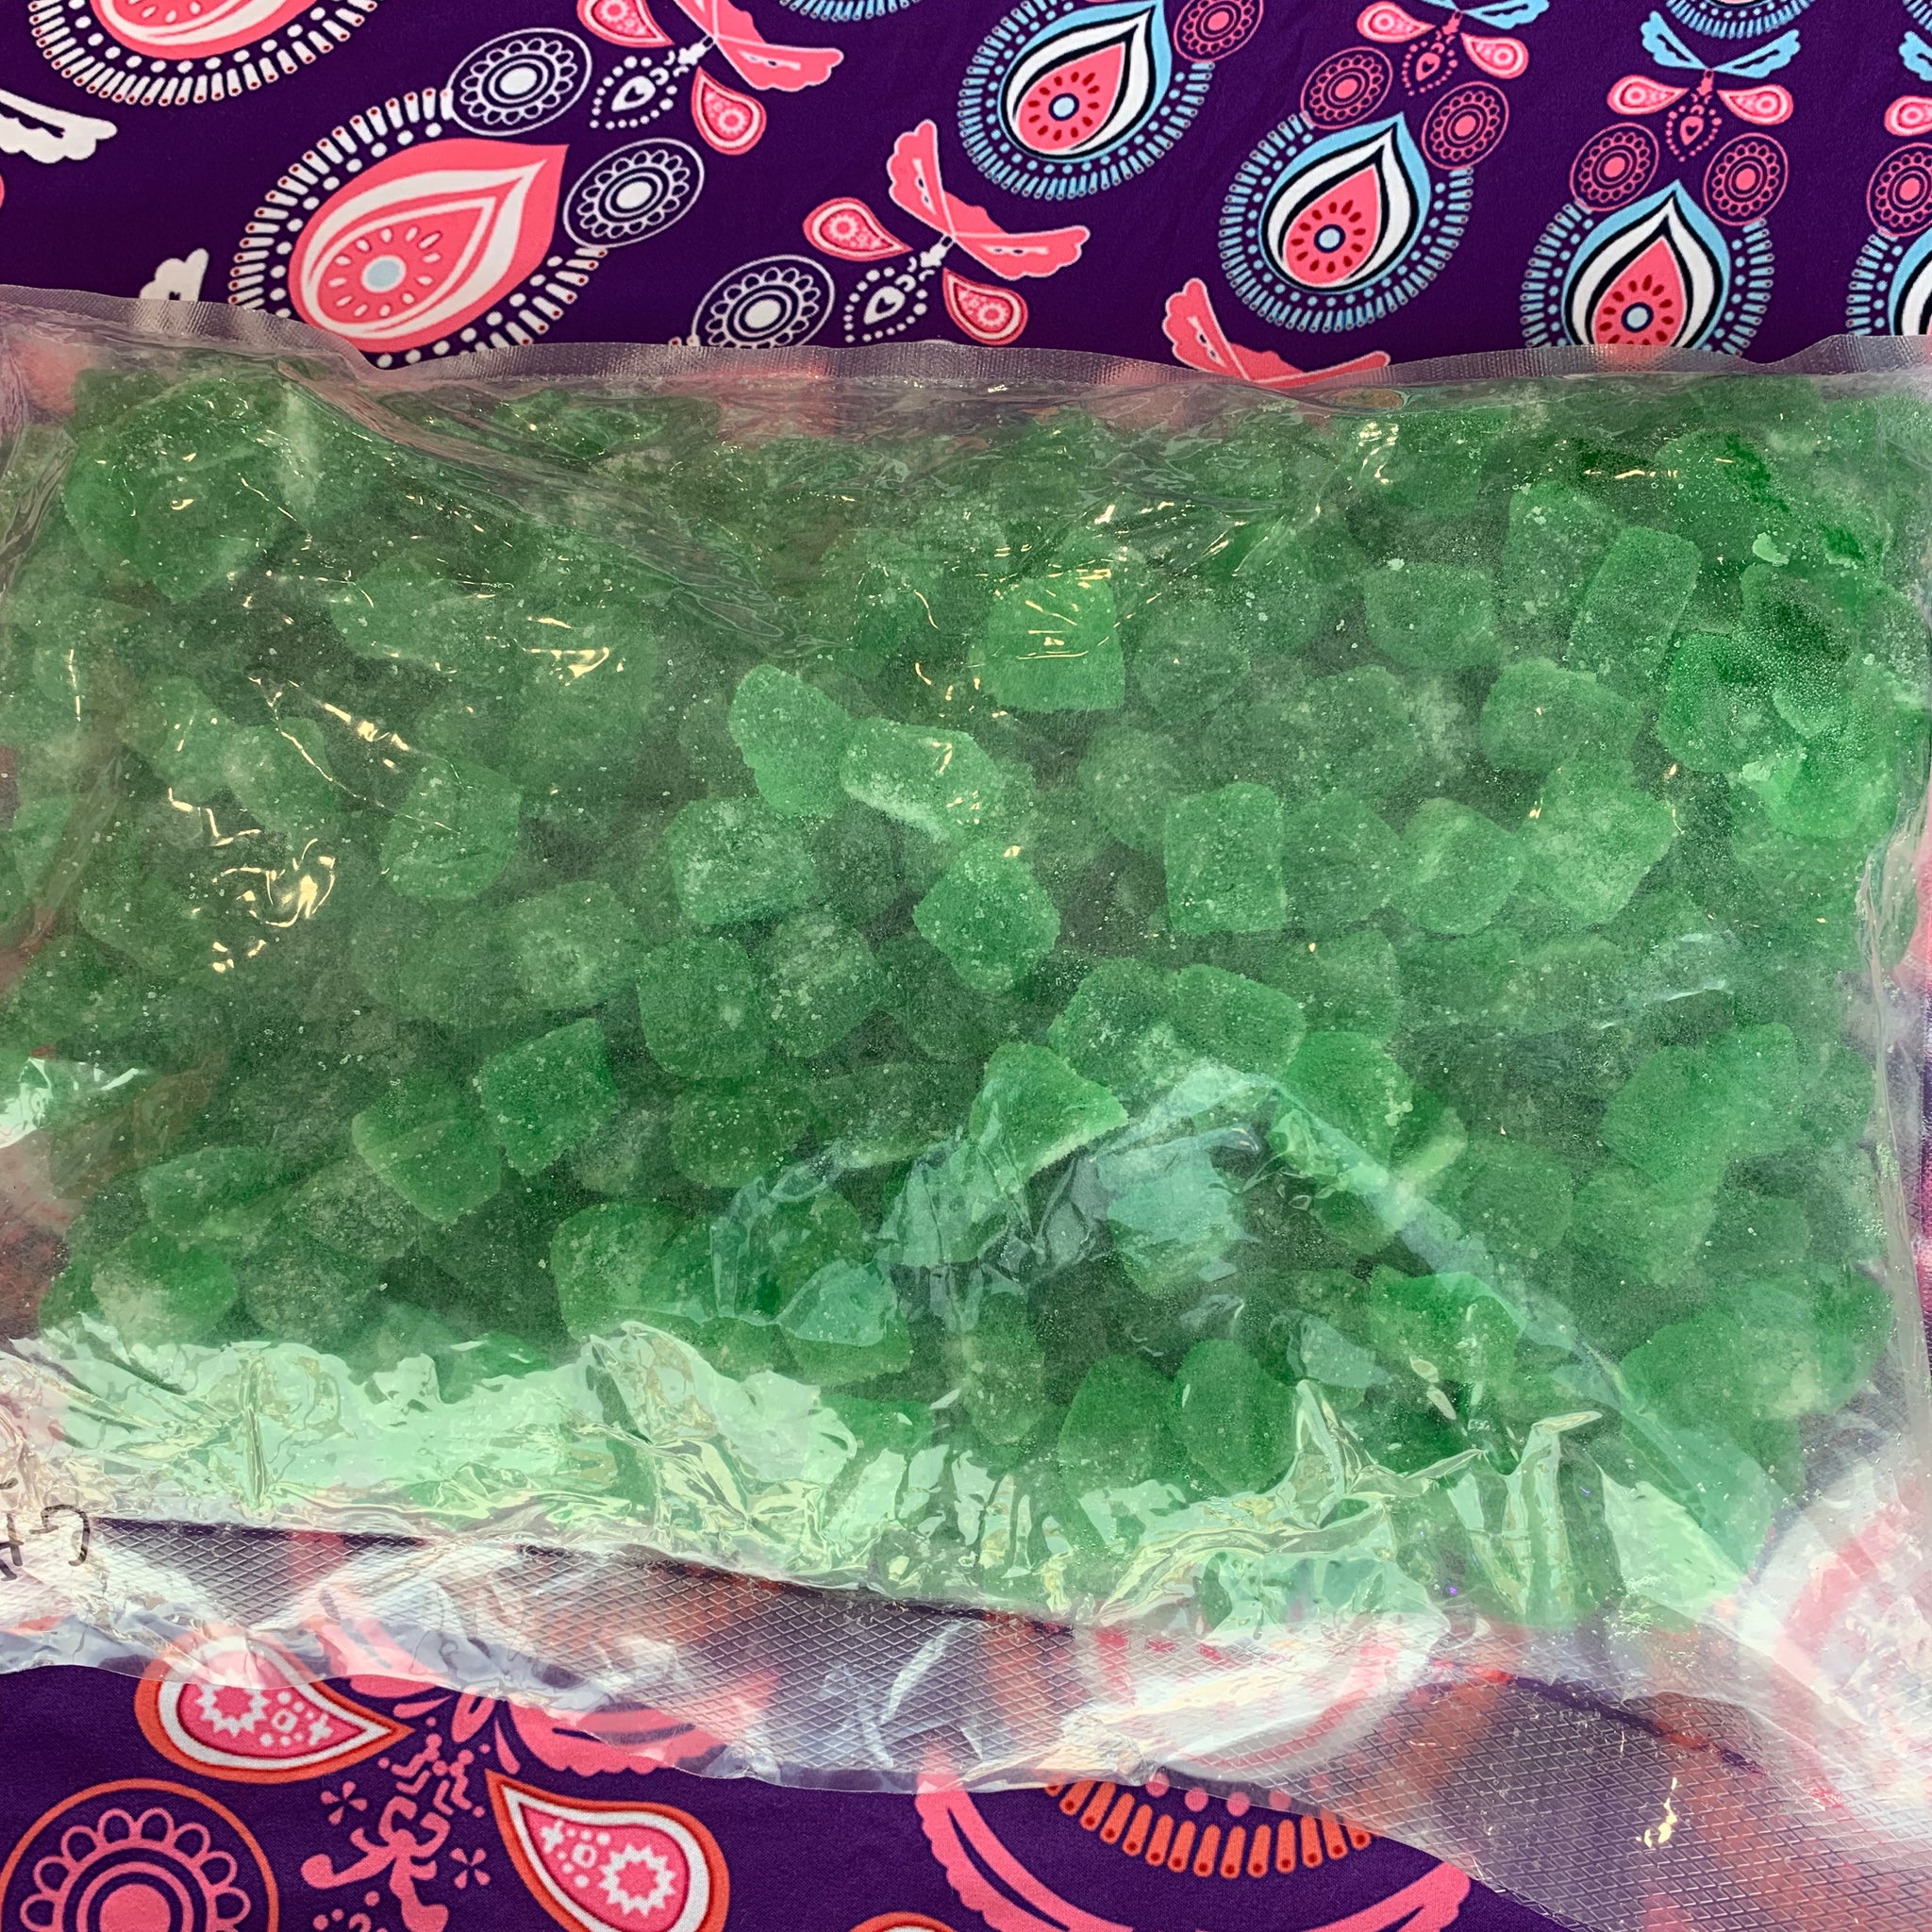 FREE CONTEST: Guess the amount of gummies...